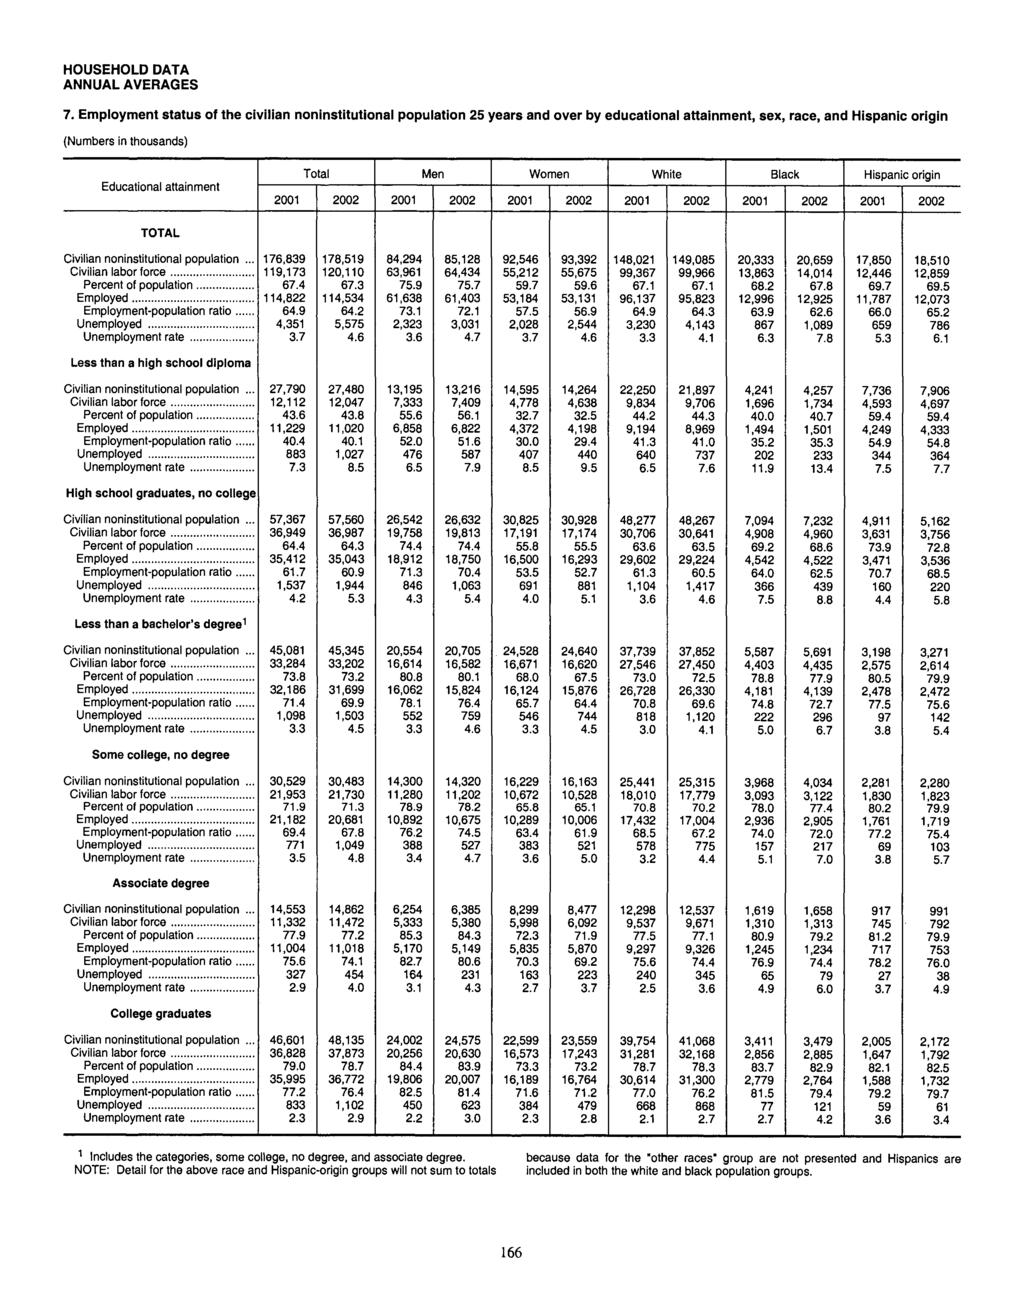 7. Employment status of the civilian noninstitutional population 25 years and over by educational attainment, sex, race, and Hispanic origin (Numbers in thousands) Educational attainment Total Men